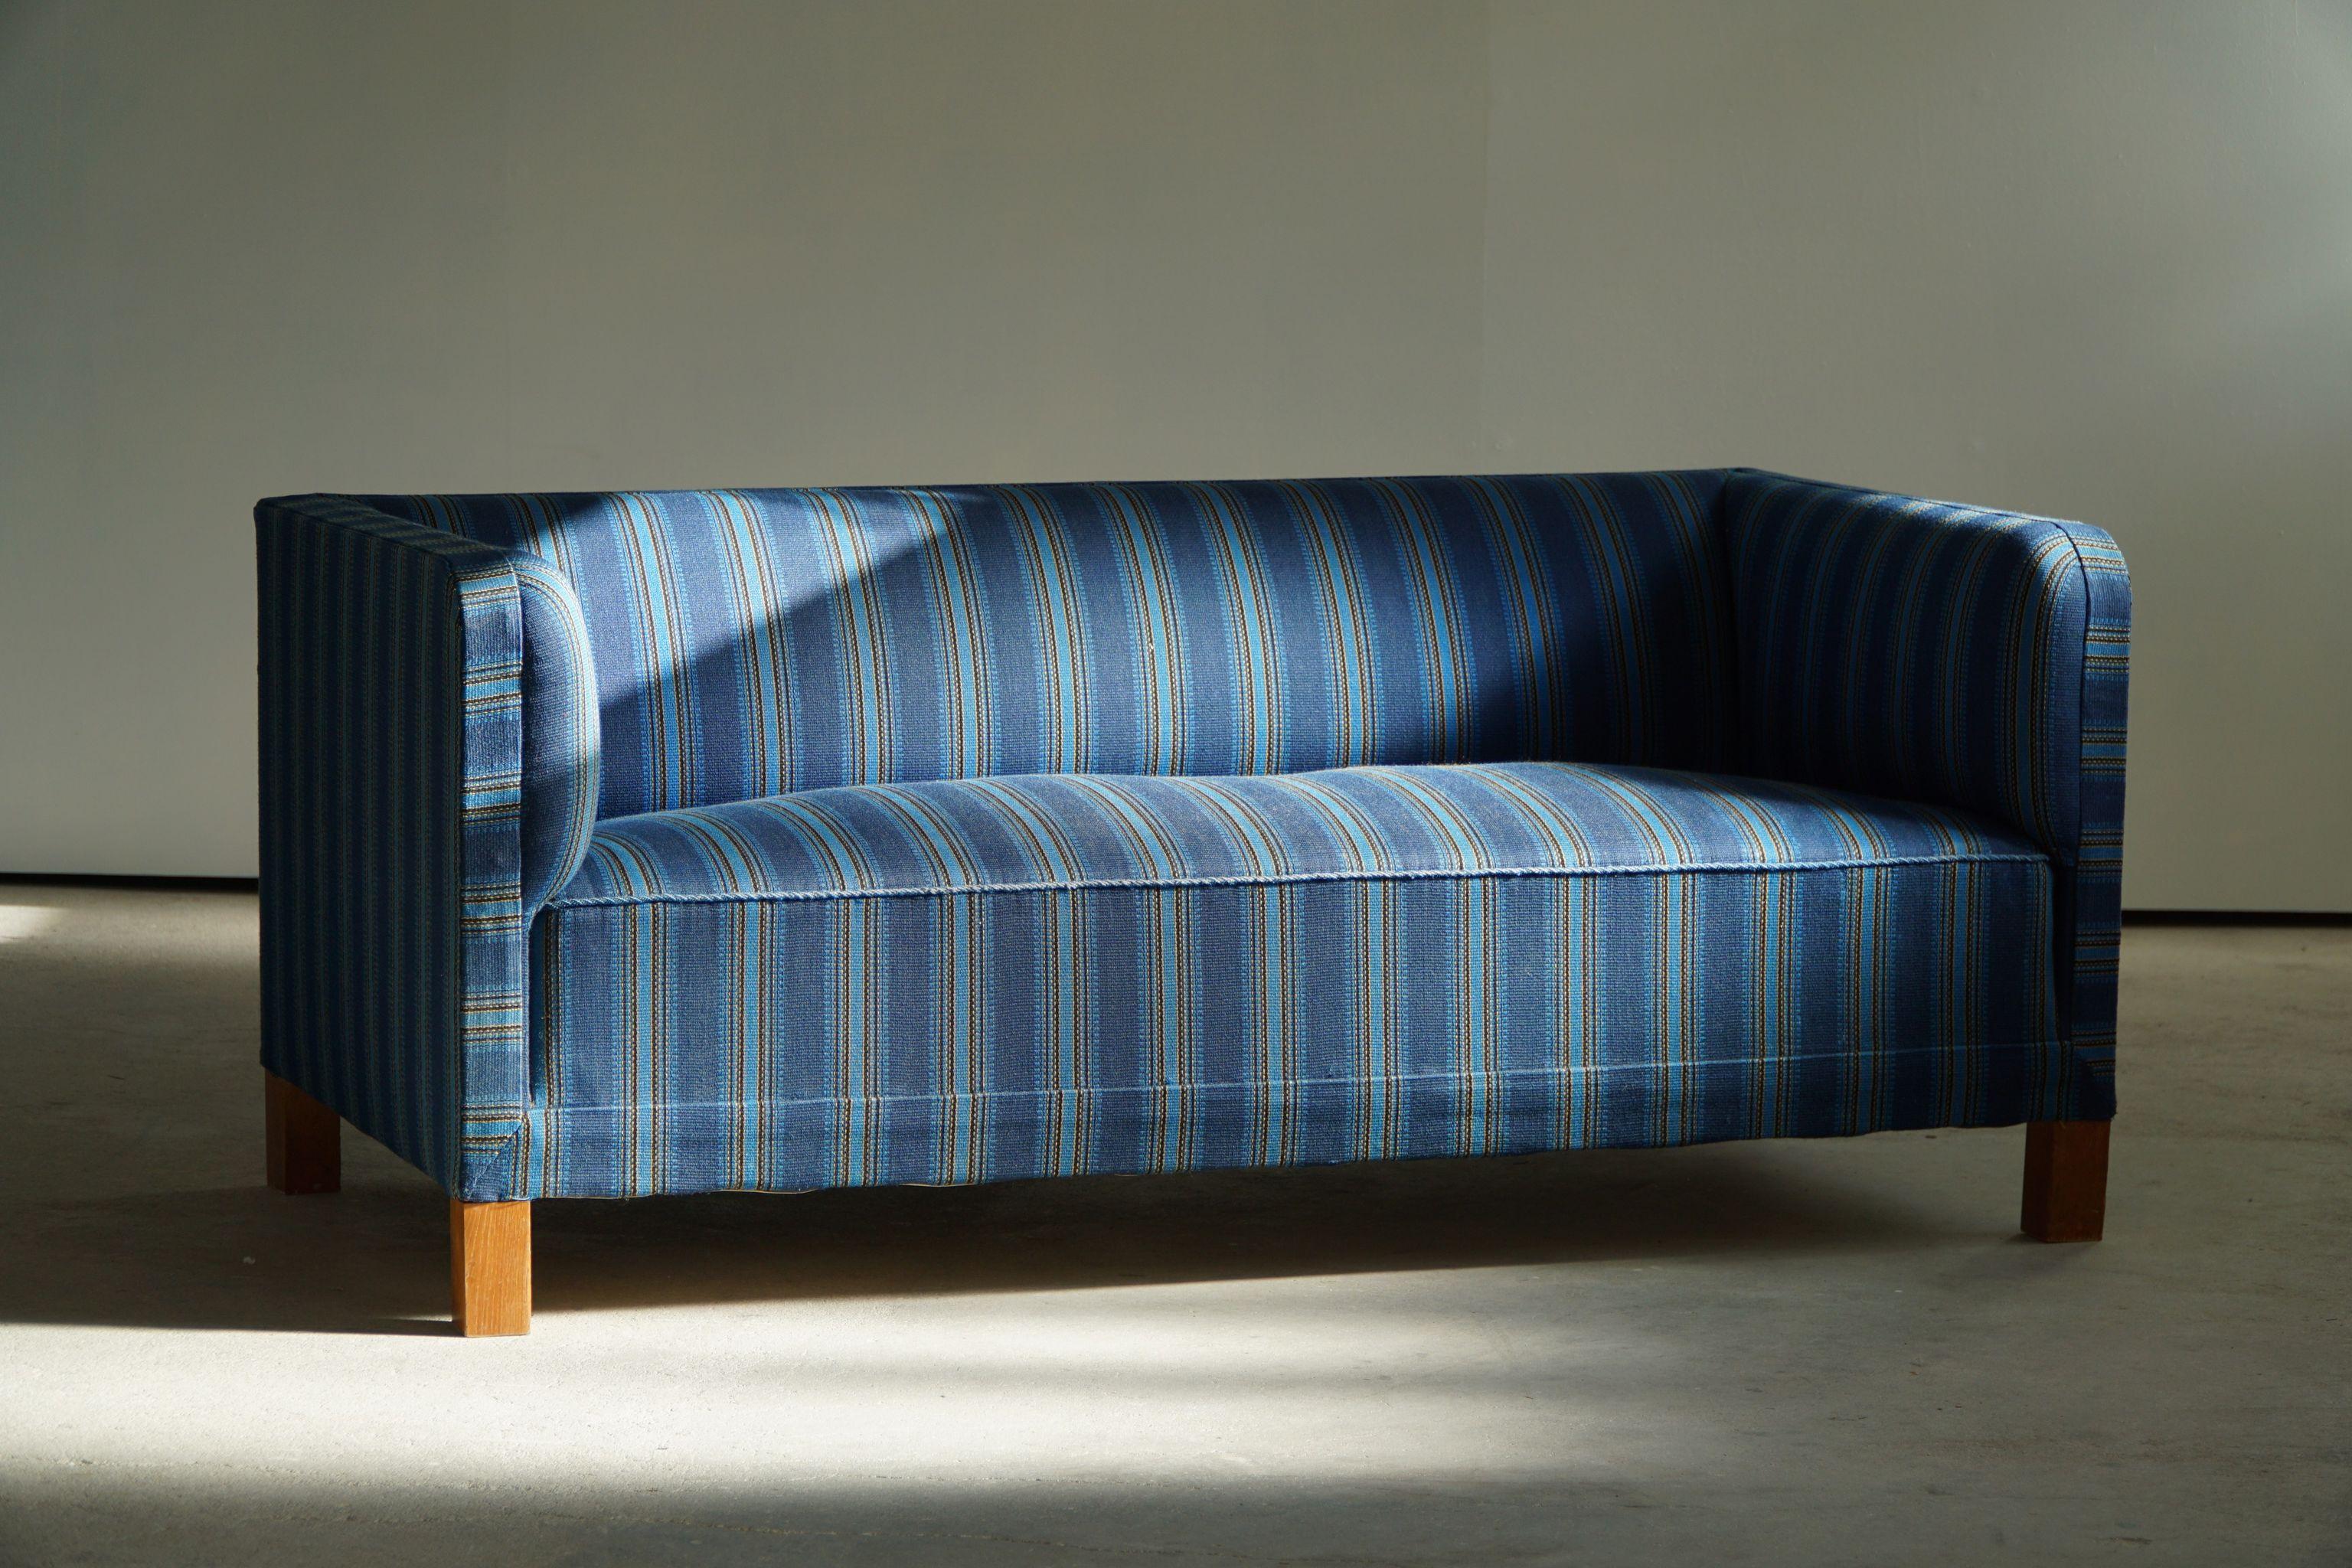 A rare and truly amazing 2.5 seater sofa in the style of Flemming Lassen. Made by a Danish Cabinetmaker in 1930s. The overall impression of this sofa is really good, still with the original vintage fabric.

A classic design with great curves that